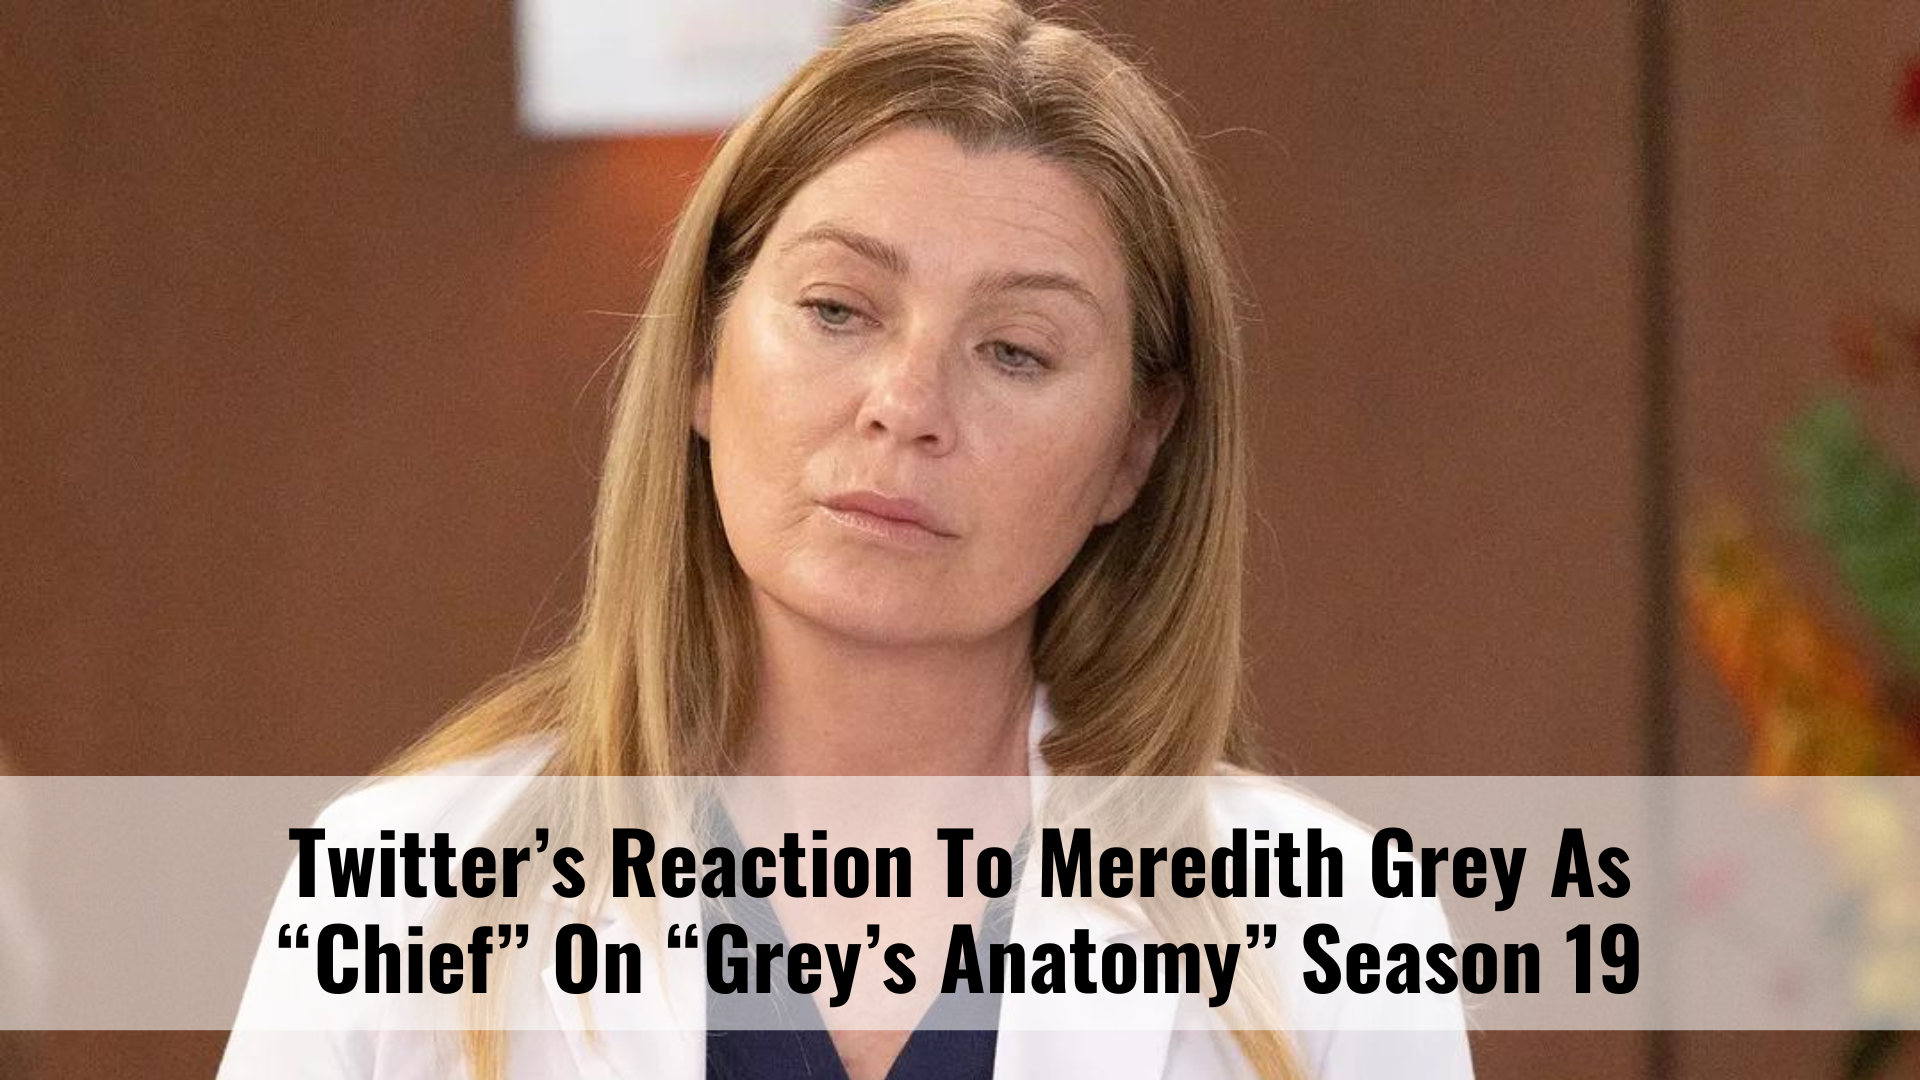 Twitter’s Reaction To Meredith Grey As “Chief” On “Grey’s Anatomy” Season 19